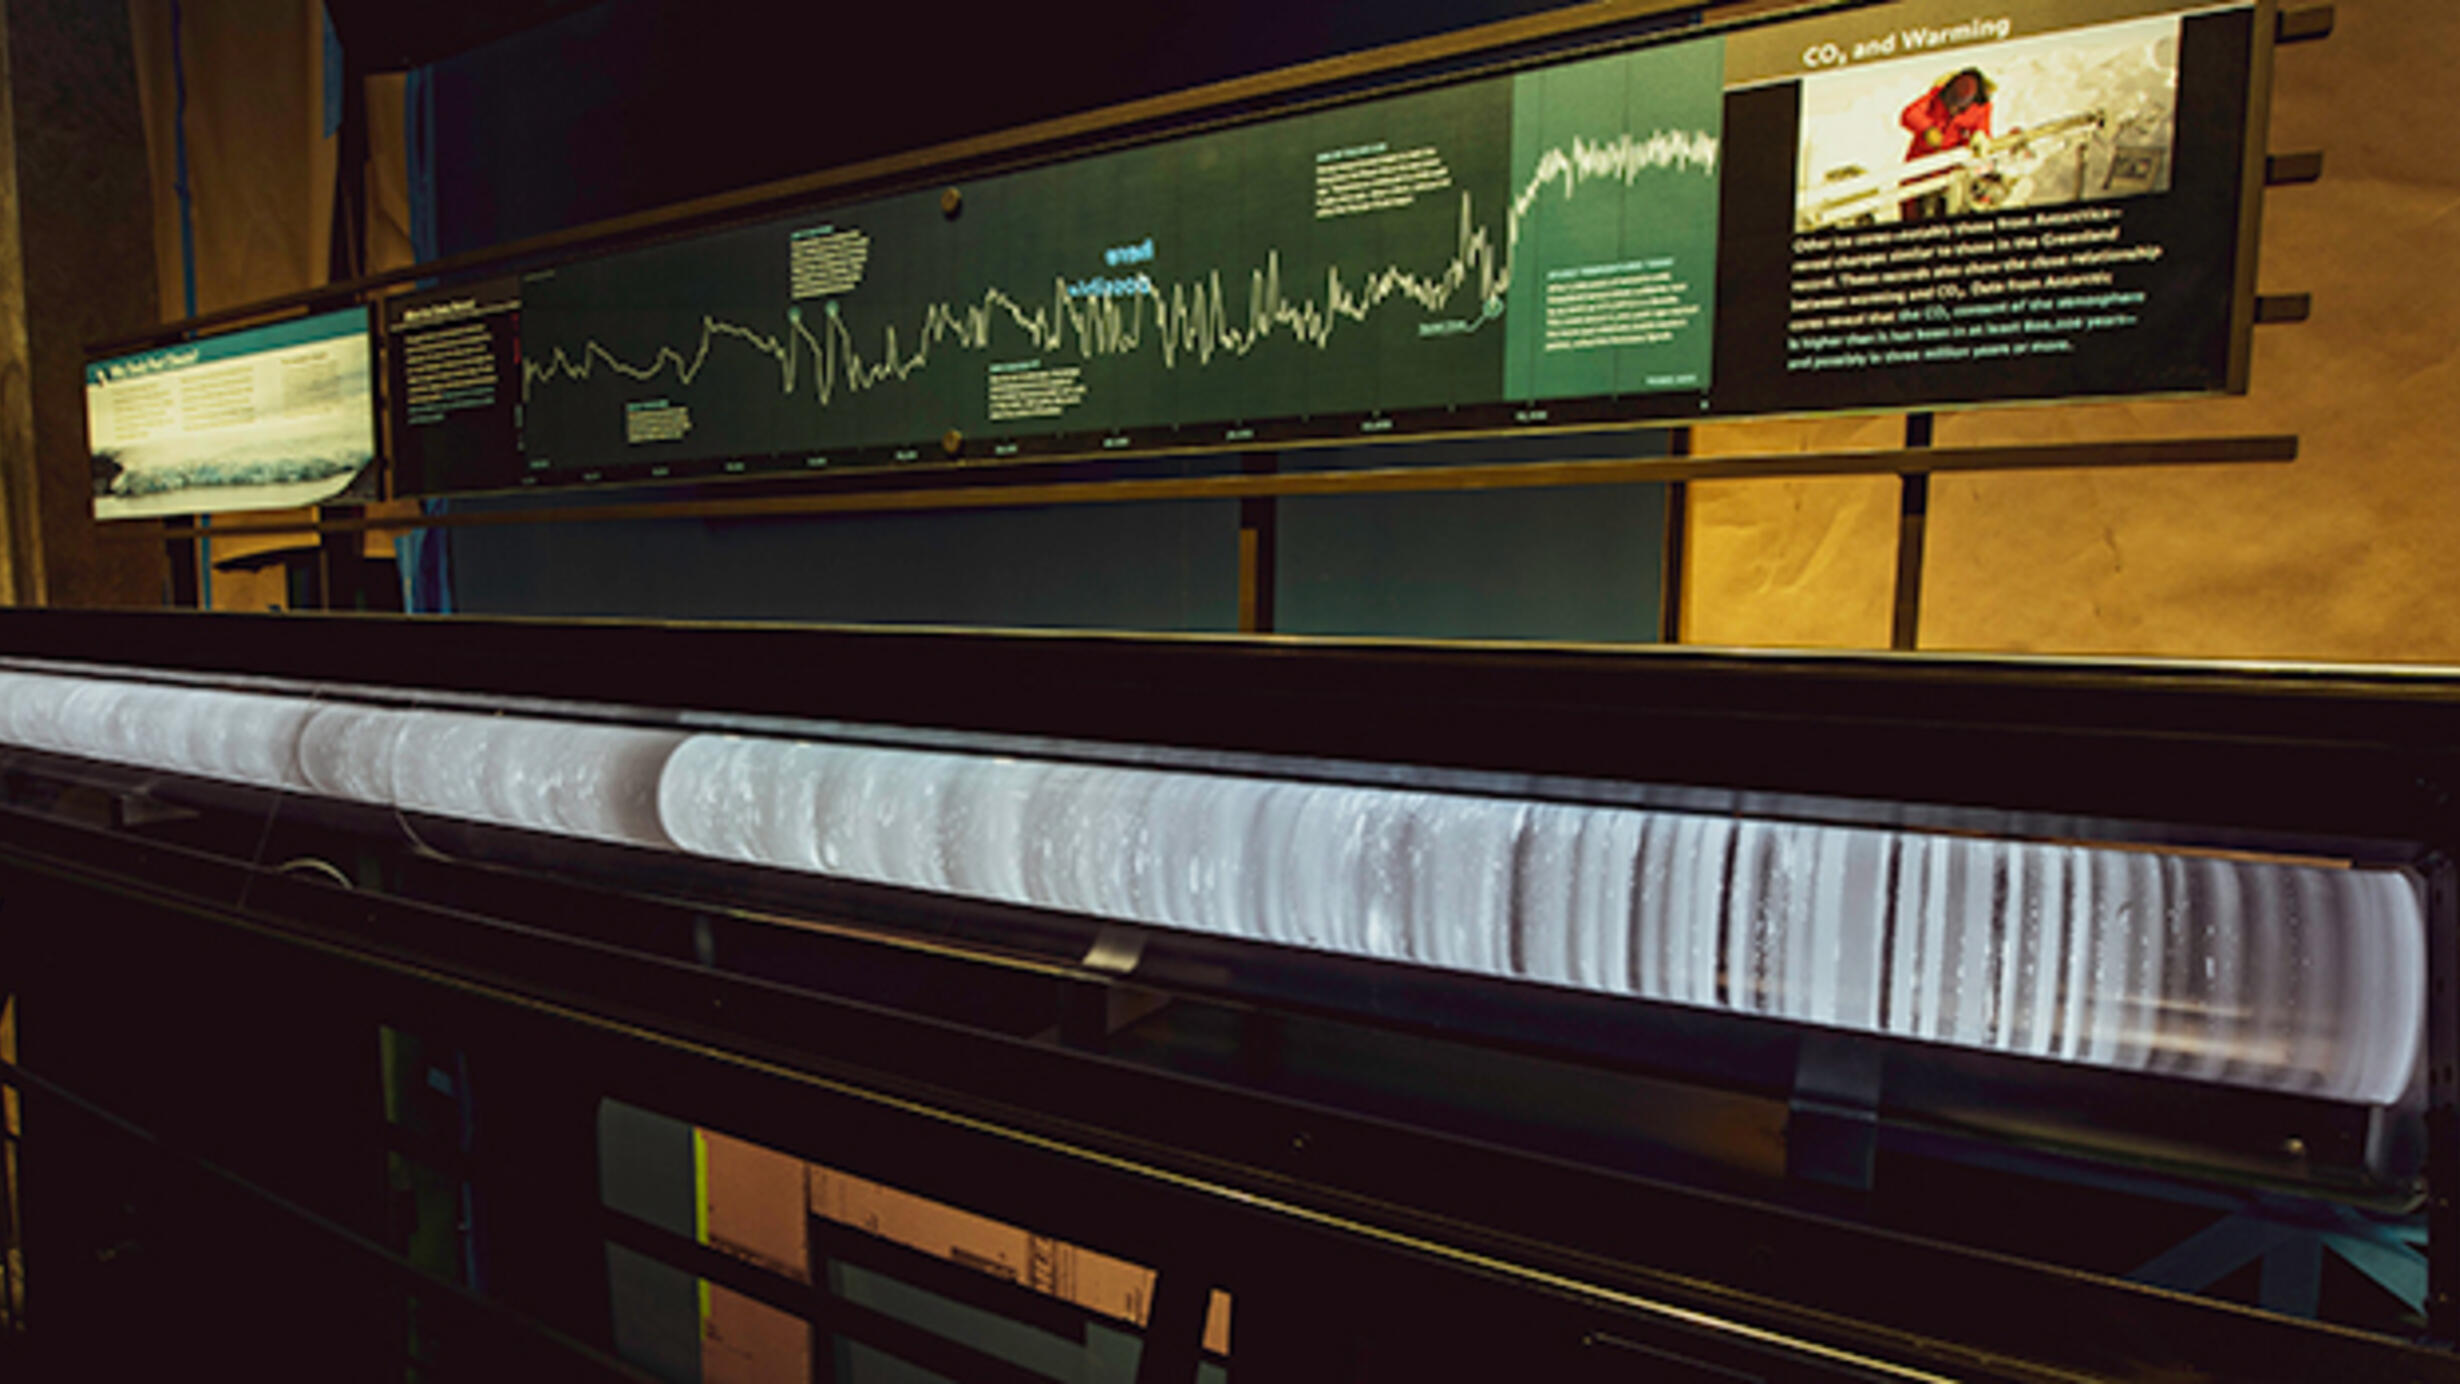 Ice core section of the Hall of Planet Earth